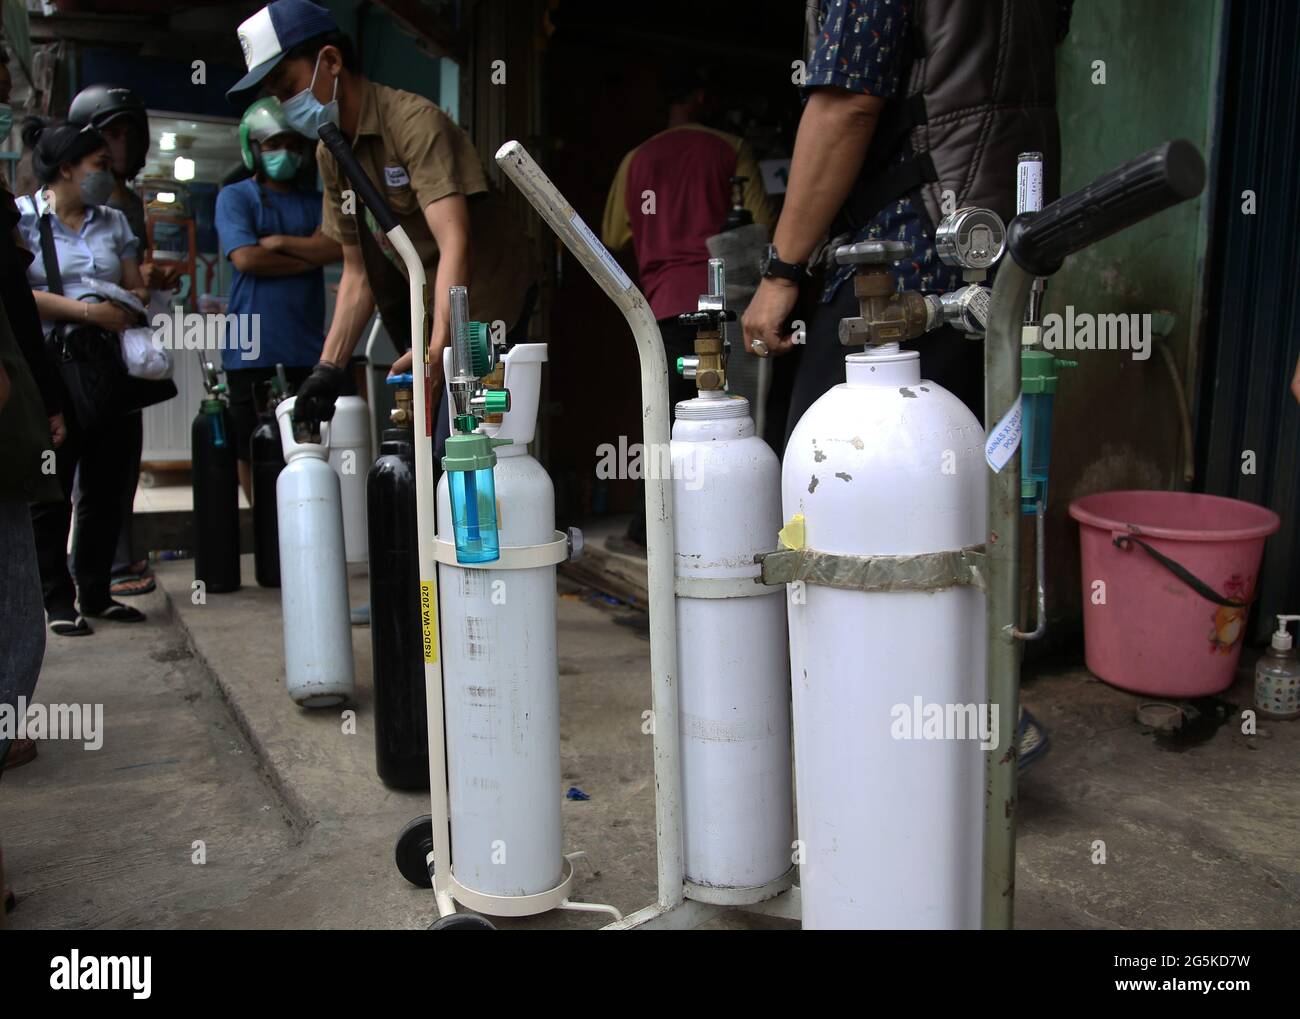 Jakarta, Jakarta, Indonesia. 28th June, 2021. Residents queue for filling oxygen gas cylinders in Manggarai, Jakarta, on June 28, 2021. The demand for new oxygen cylinders and filling oxygen cylinders has increased drastically following the surge in Covid-19 cases in DKI Jakarta and currently oxygen cylinders are becoming scarce in the market so that refilling oxygen is also an option even though residents have to queue. Credit: Dasril Roszandi/ZUMA Wire/Alamy Live News Stock Photo